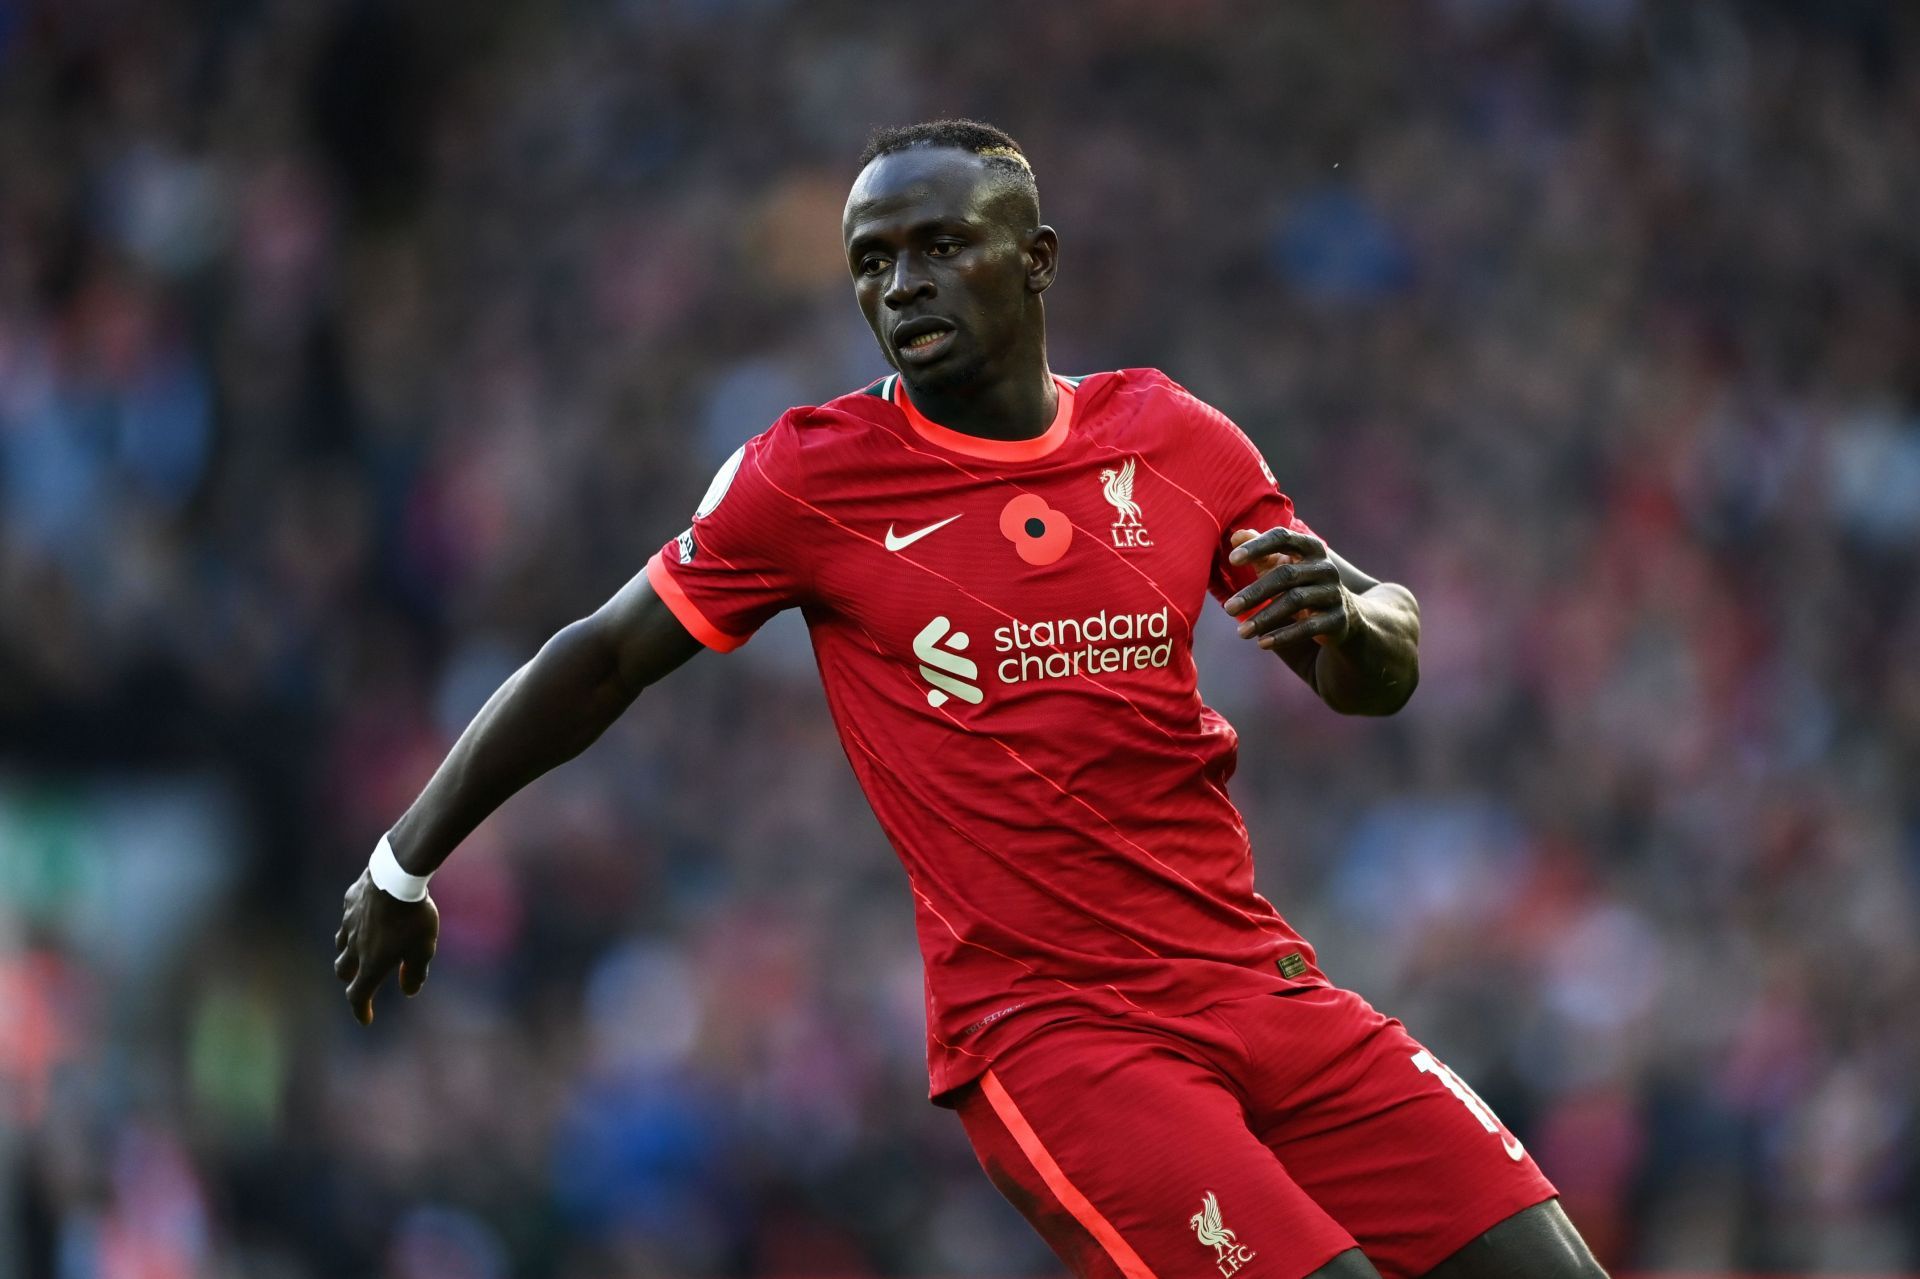 Real Madrid are interested in Sadio Mane.